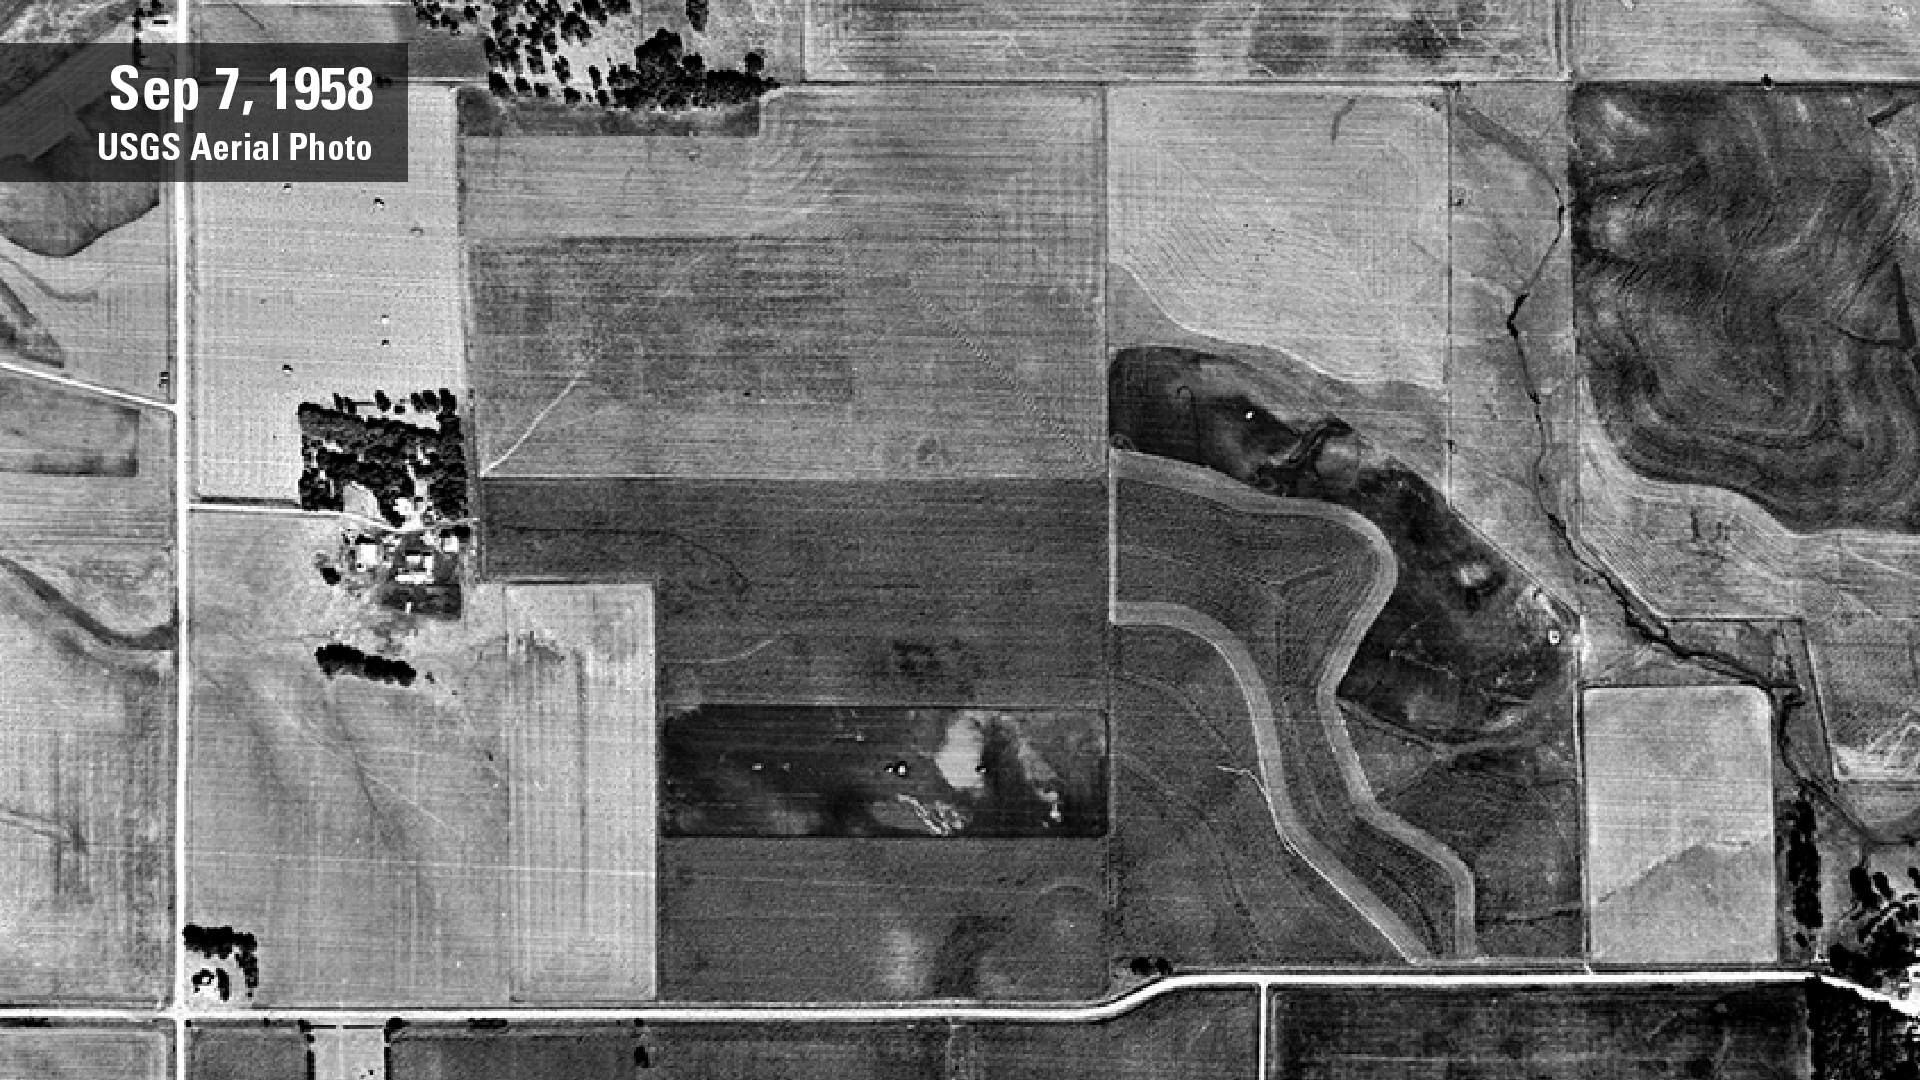 Aerial Photos of an Image Archive before